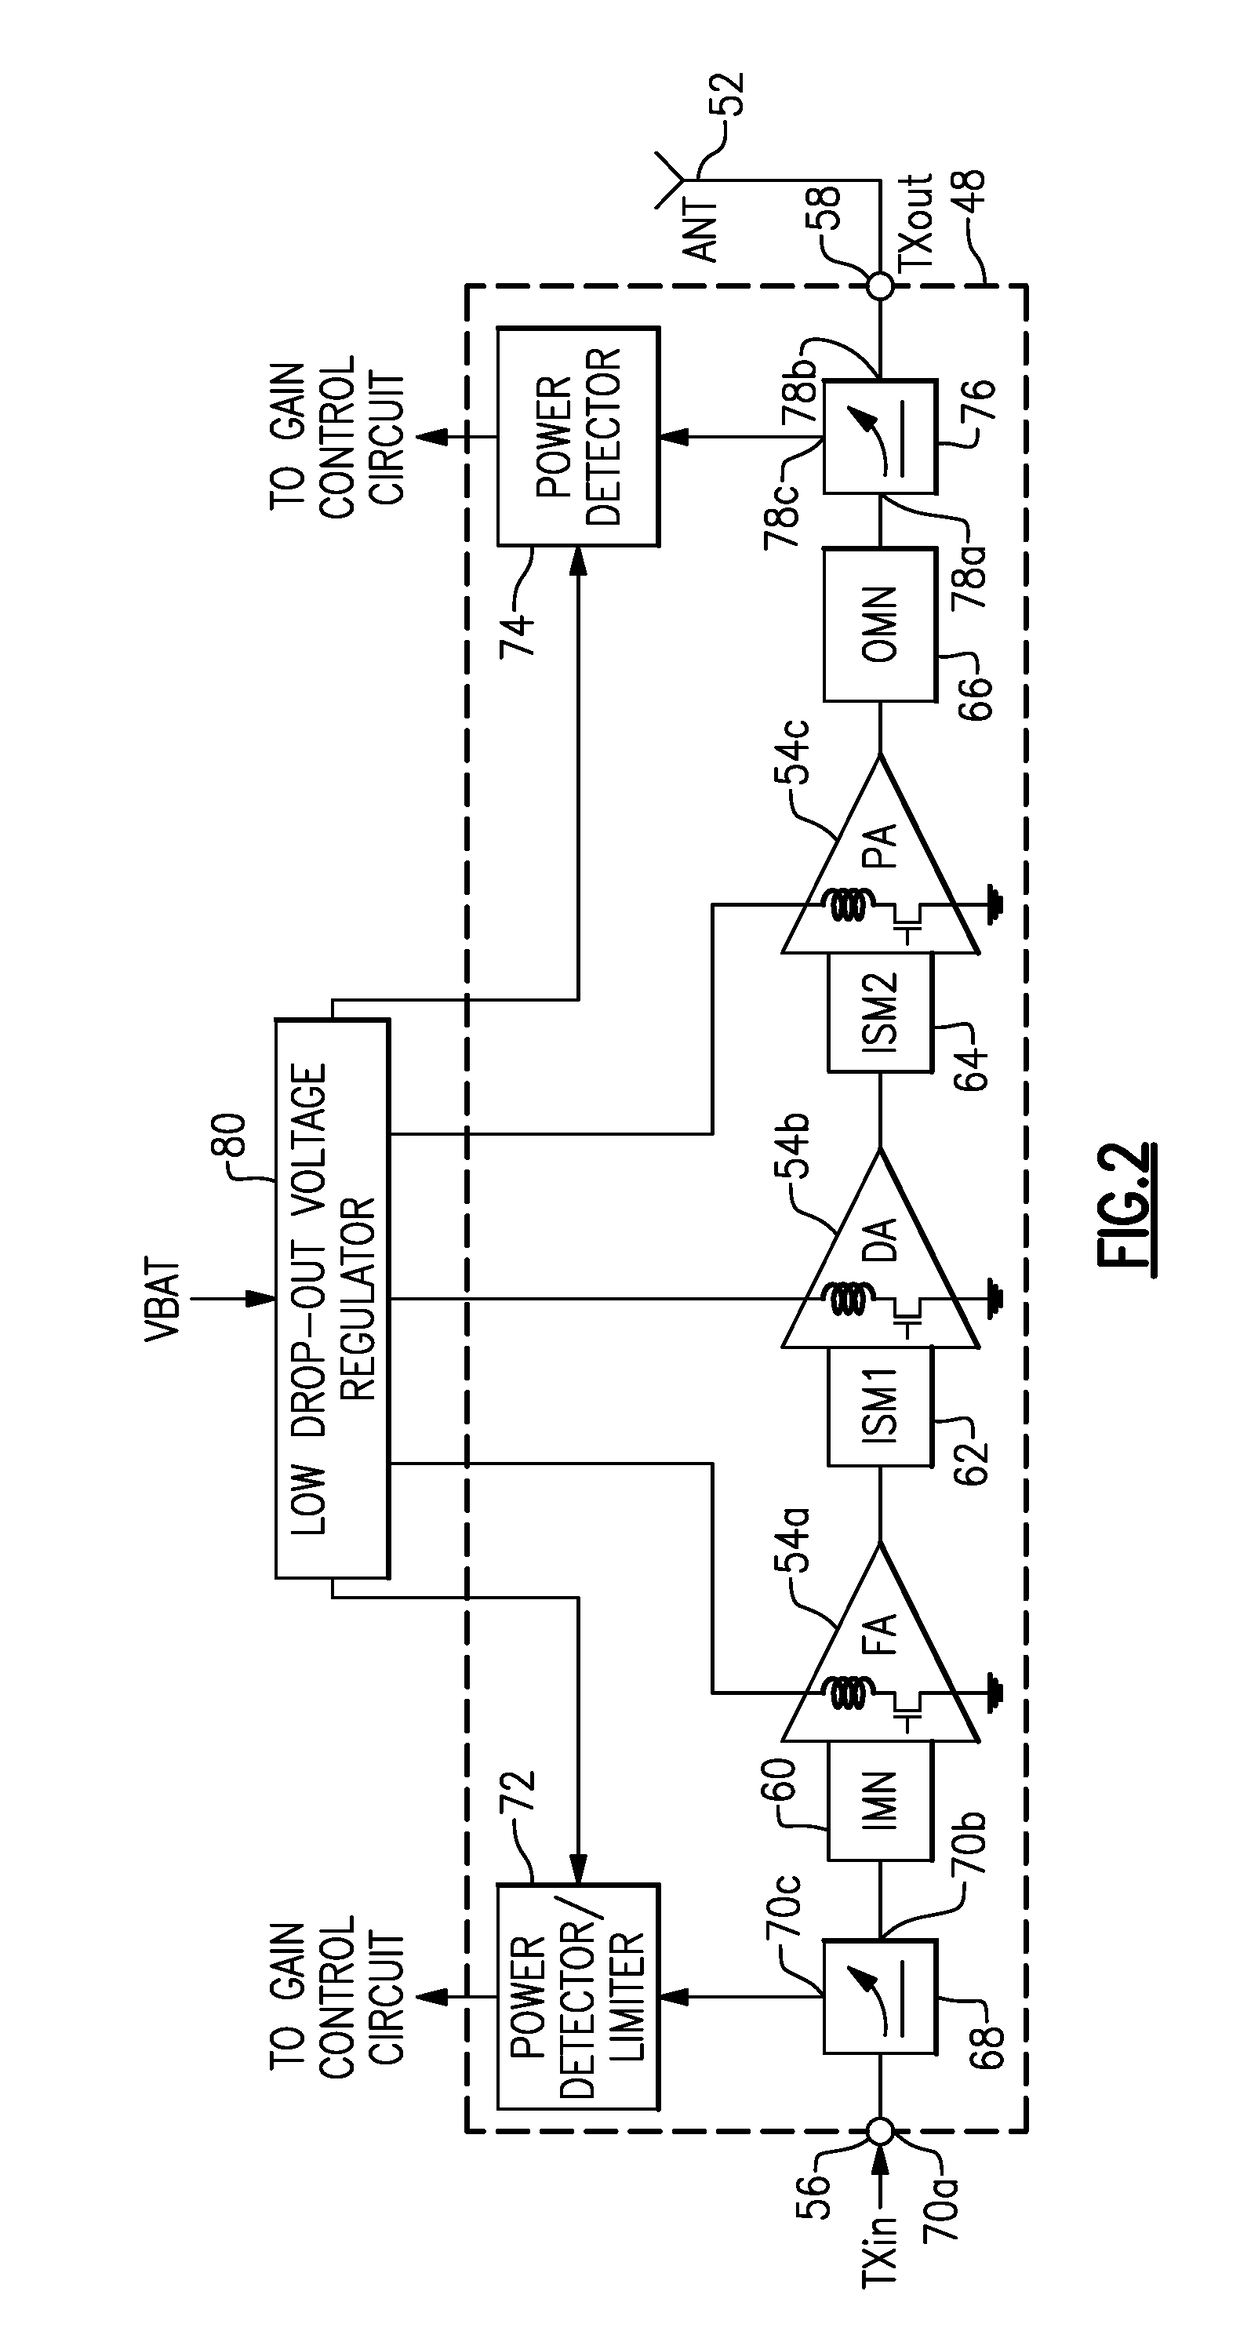 Wide dynamic range broadband current mode linear detector circuits for high power radio frequency power amplifier